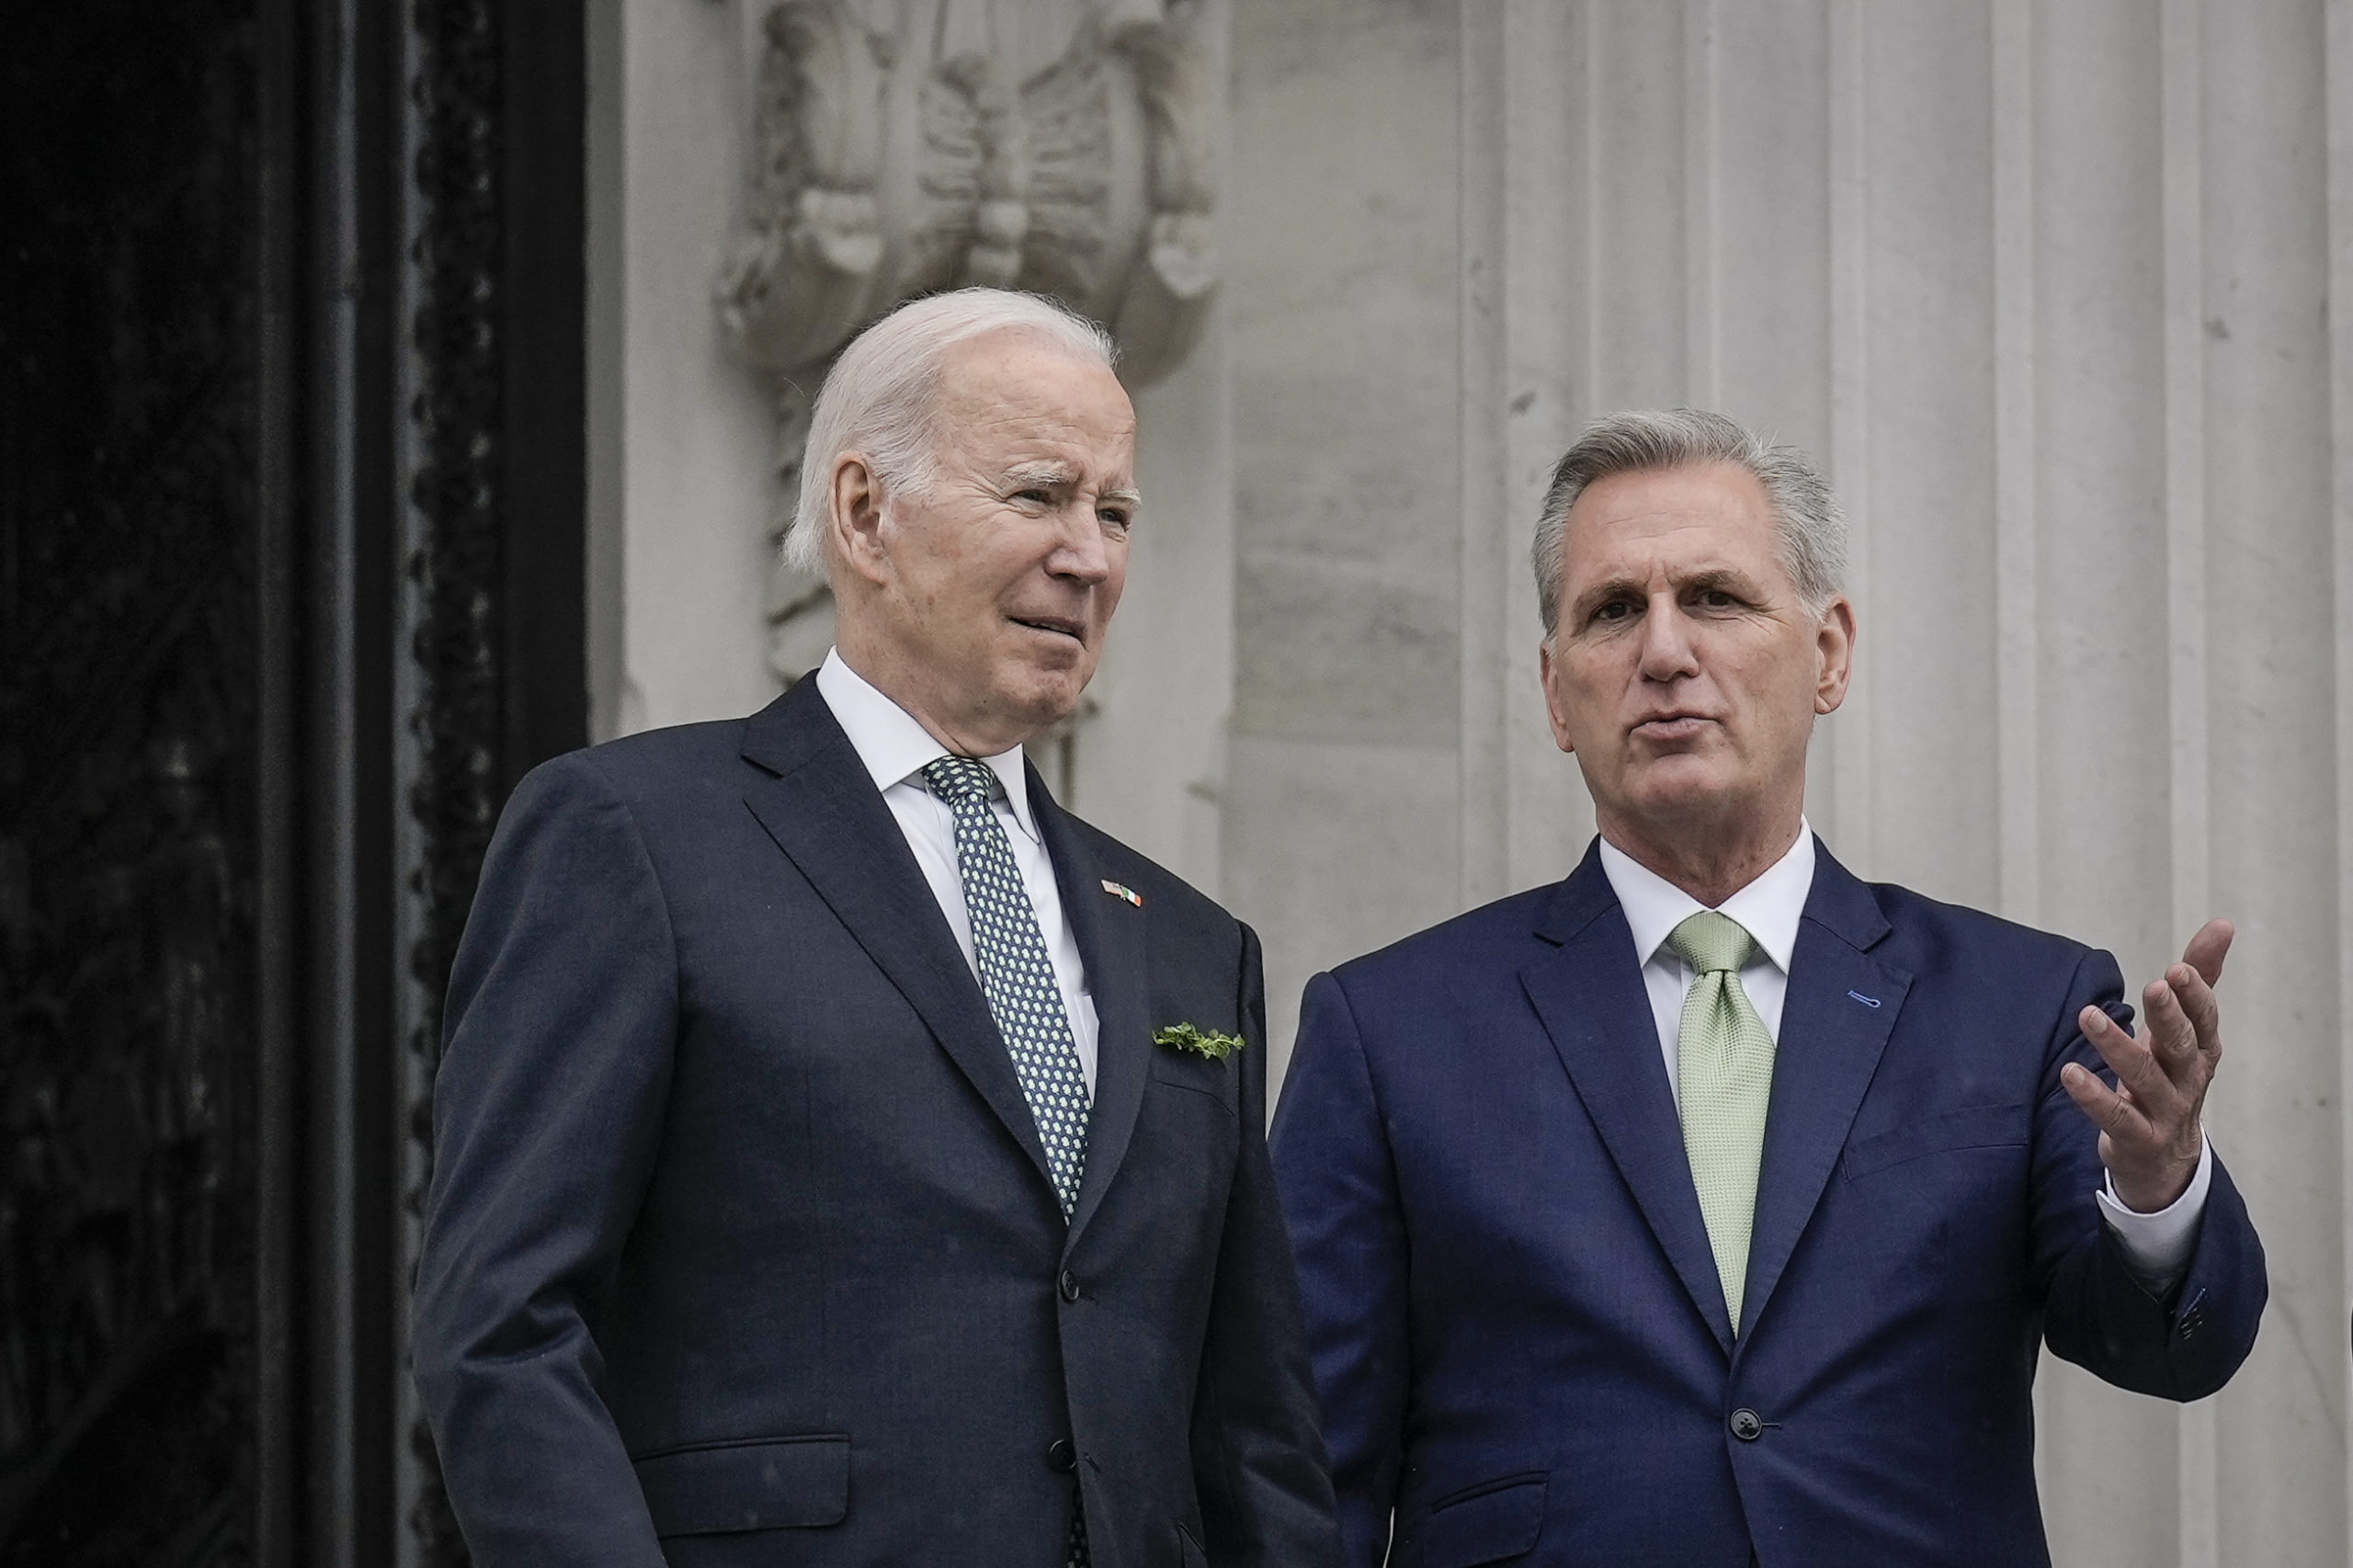 (L-R) U.S. President Joe Biden and Speaker of the House Kevin McCarthy (R-CA) talk as they depart the U.S. Capitol following the Friends of Ireland Luncheon on Saint Patrick's Day March 17, 2023 in Washington, DC. The Friends of Ireland caucus was founded in 1981 by the late Irish-American politicians Irish-American politicians Sen. Ted Kennedy (D-MA), Sen. Daniel Moynihan (D-NY) and former Speaker of the House Tip ONeill (D-MA). (Photo by Drew Angerer/Getty Images)